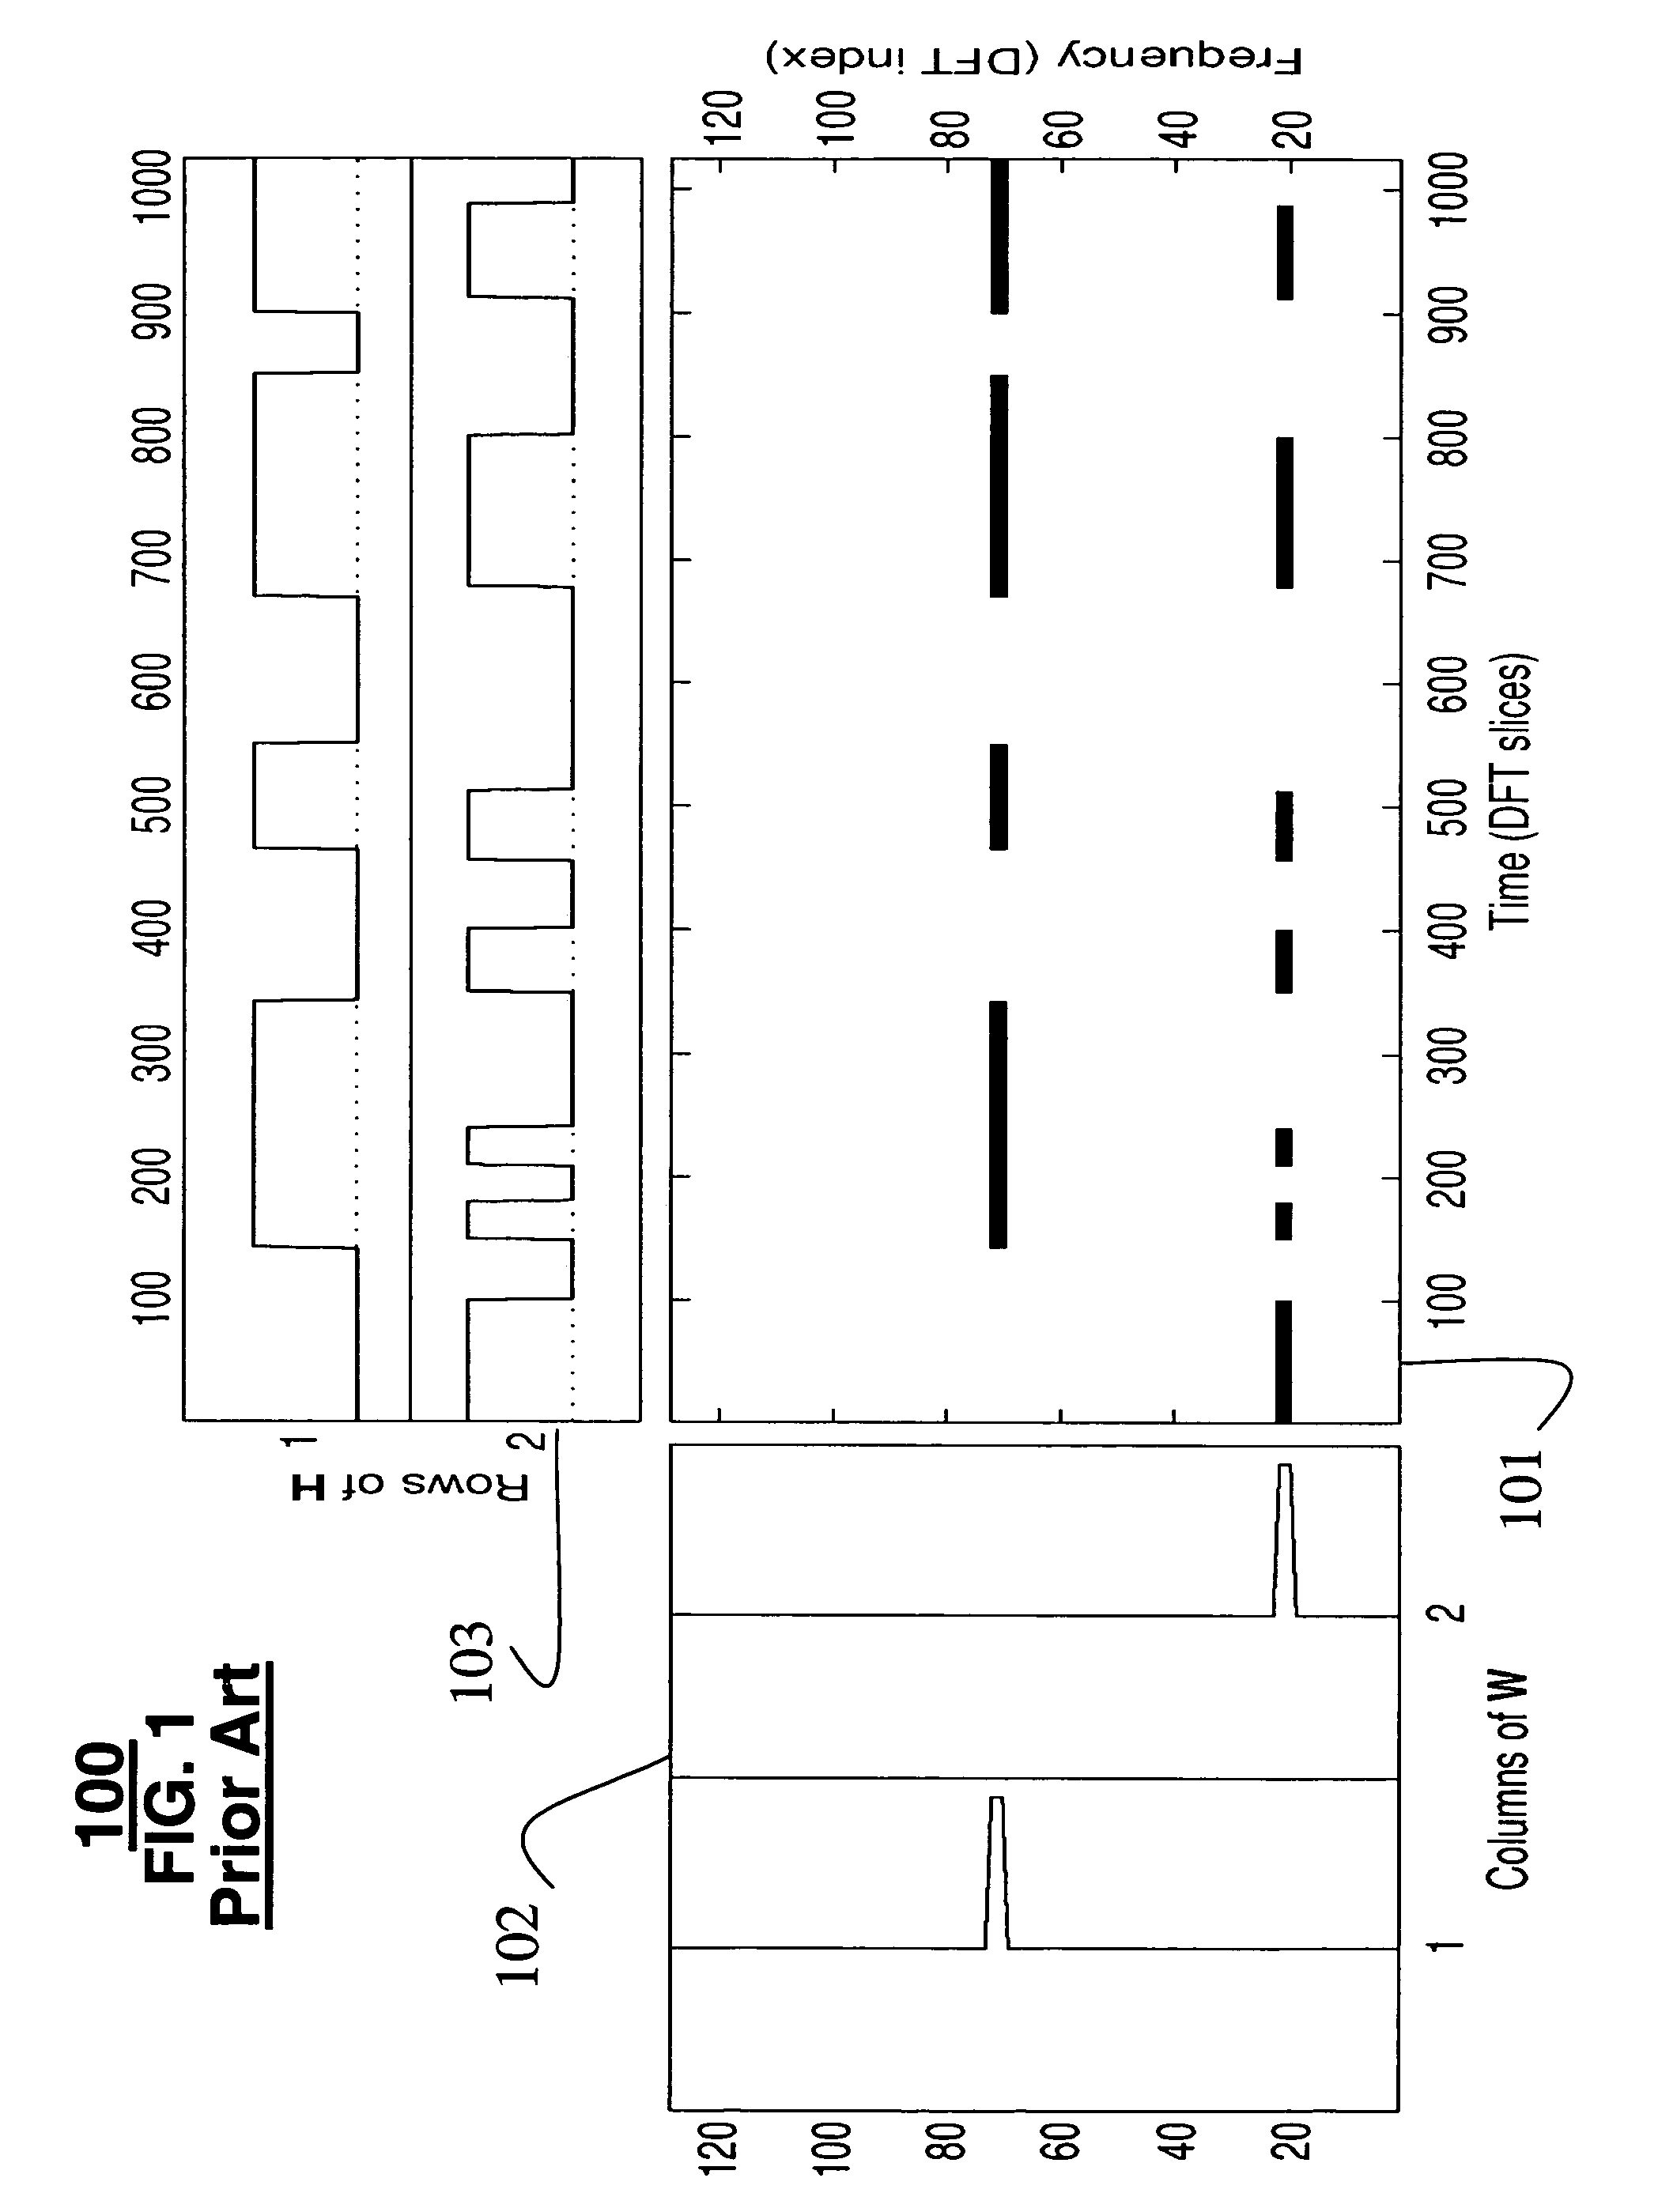 System for separating multiple sound sources from monophonic input with non-negative matrix factor deconvolution